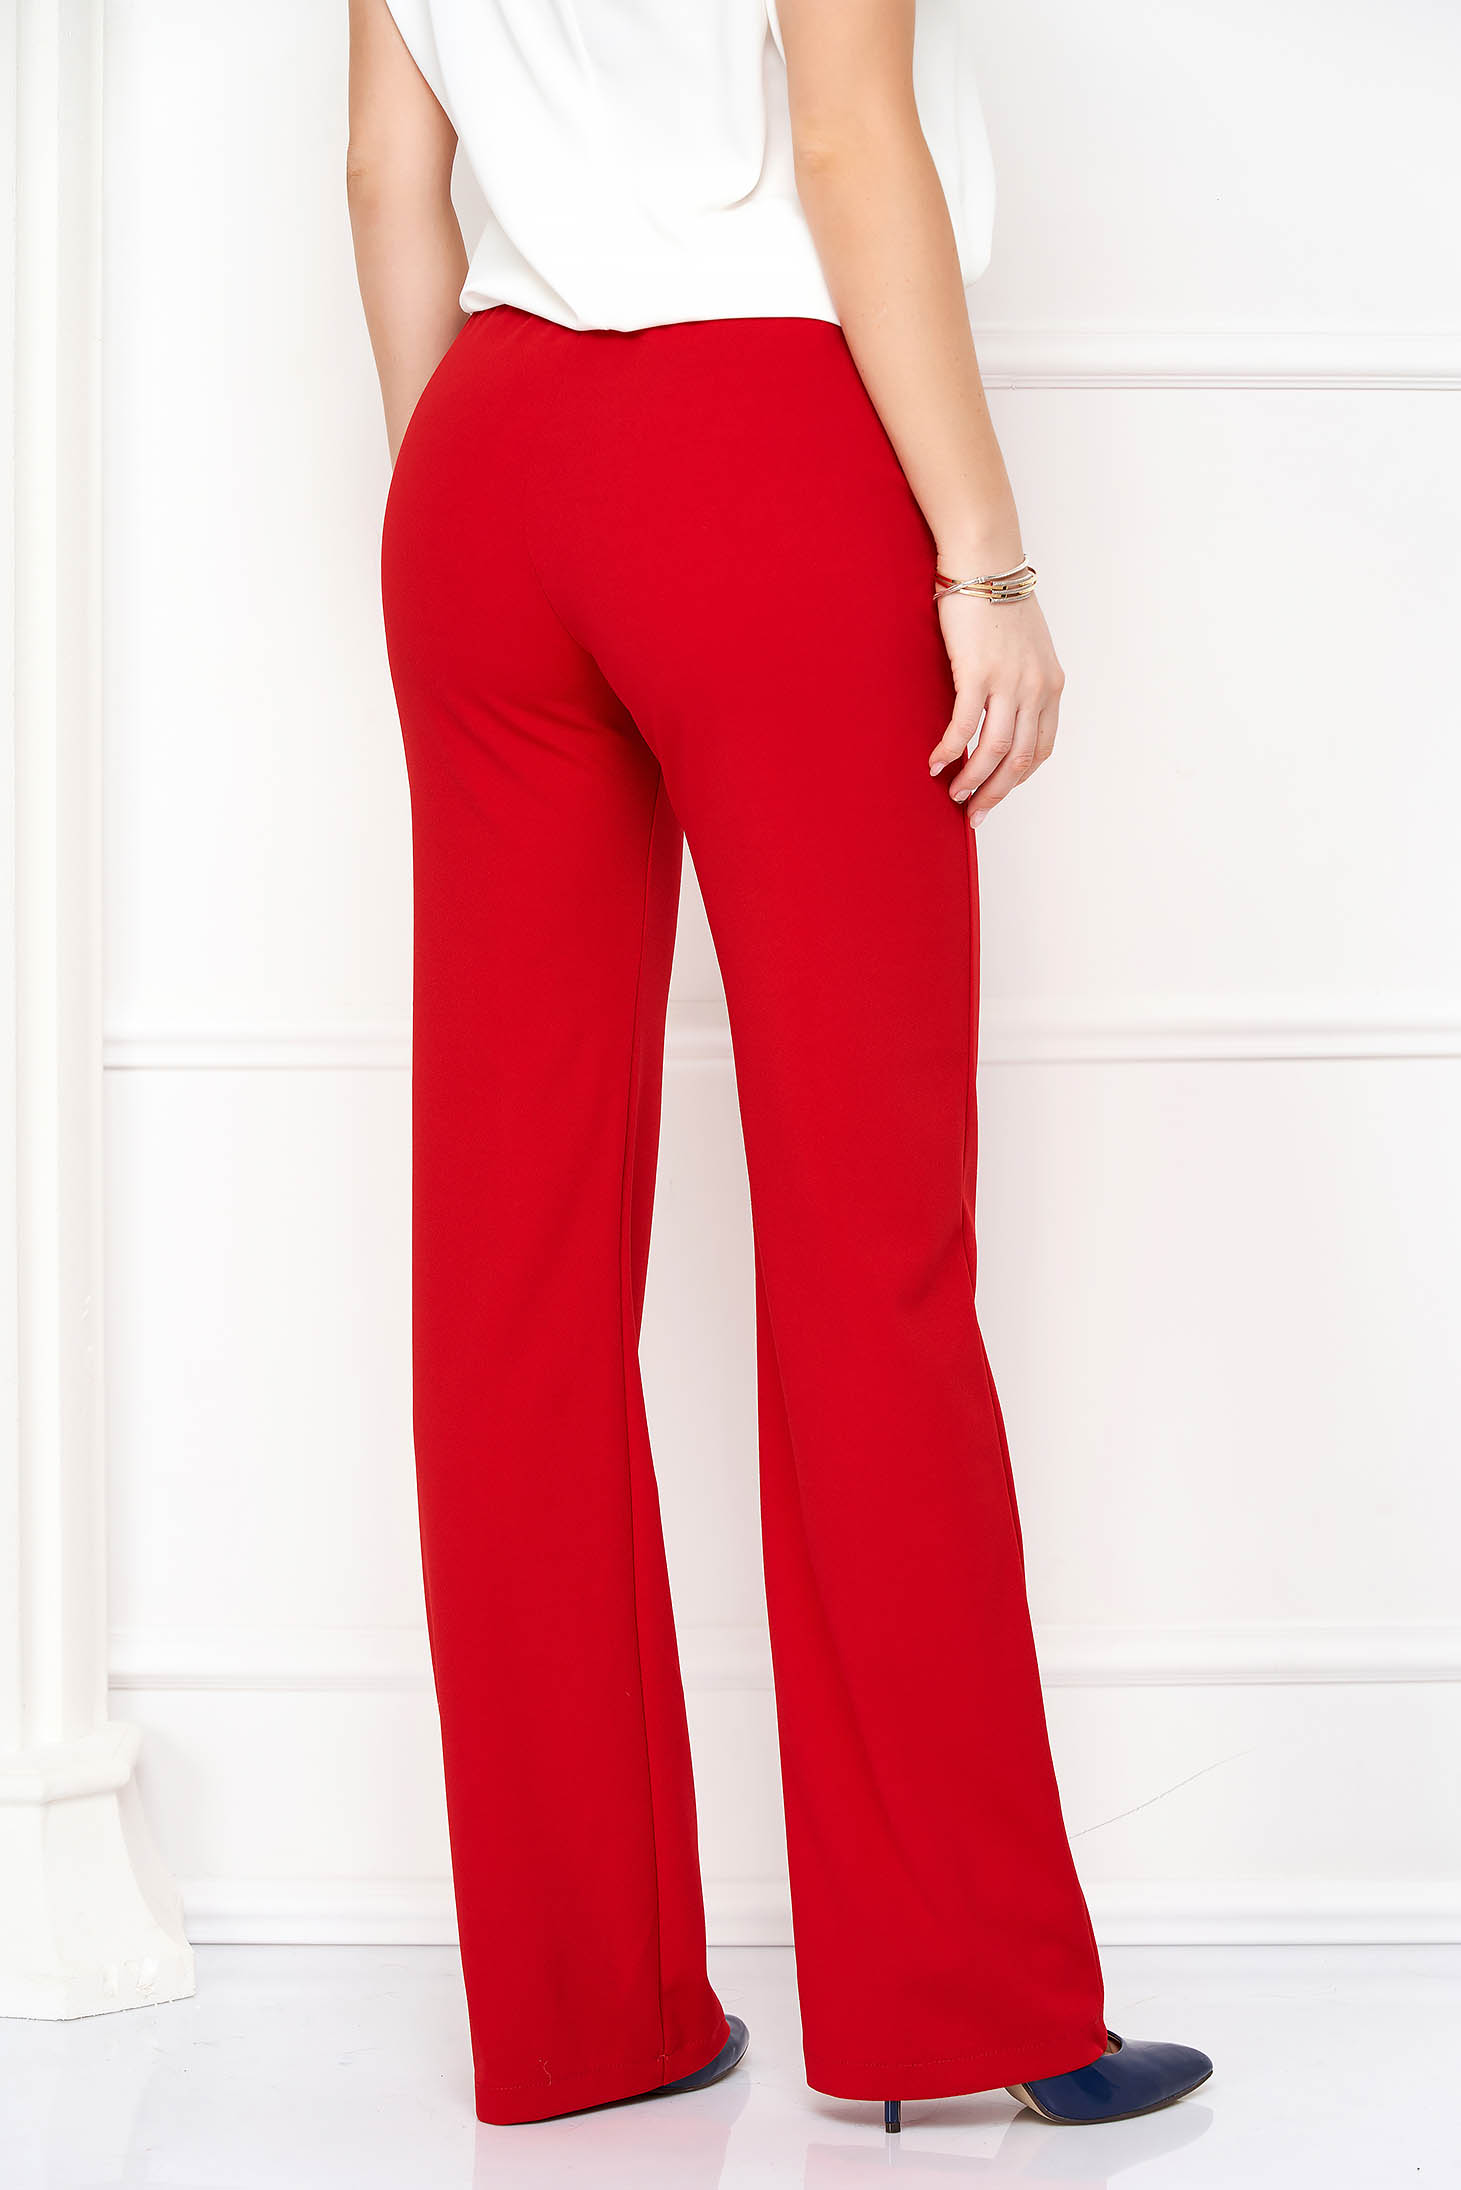 Red Flared Long Crepe Pants with Pockets - StarShinerS 4 - StarShinerS.com